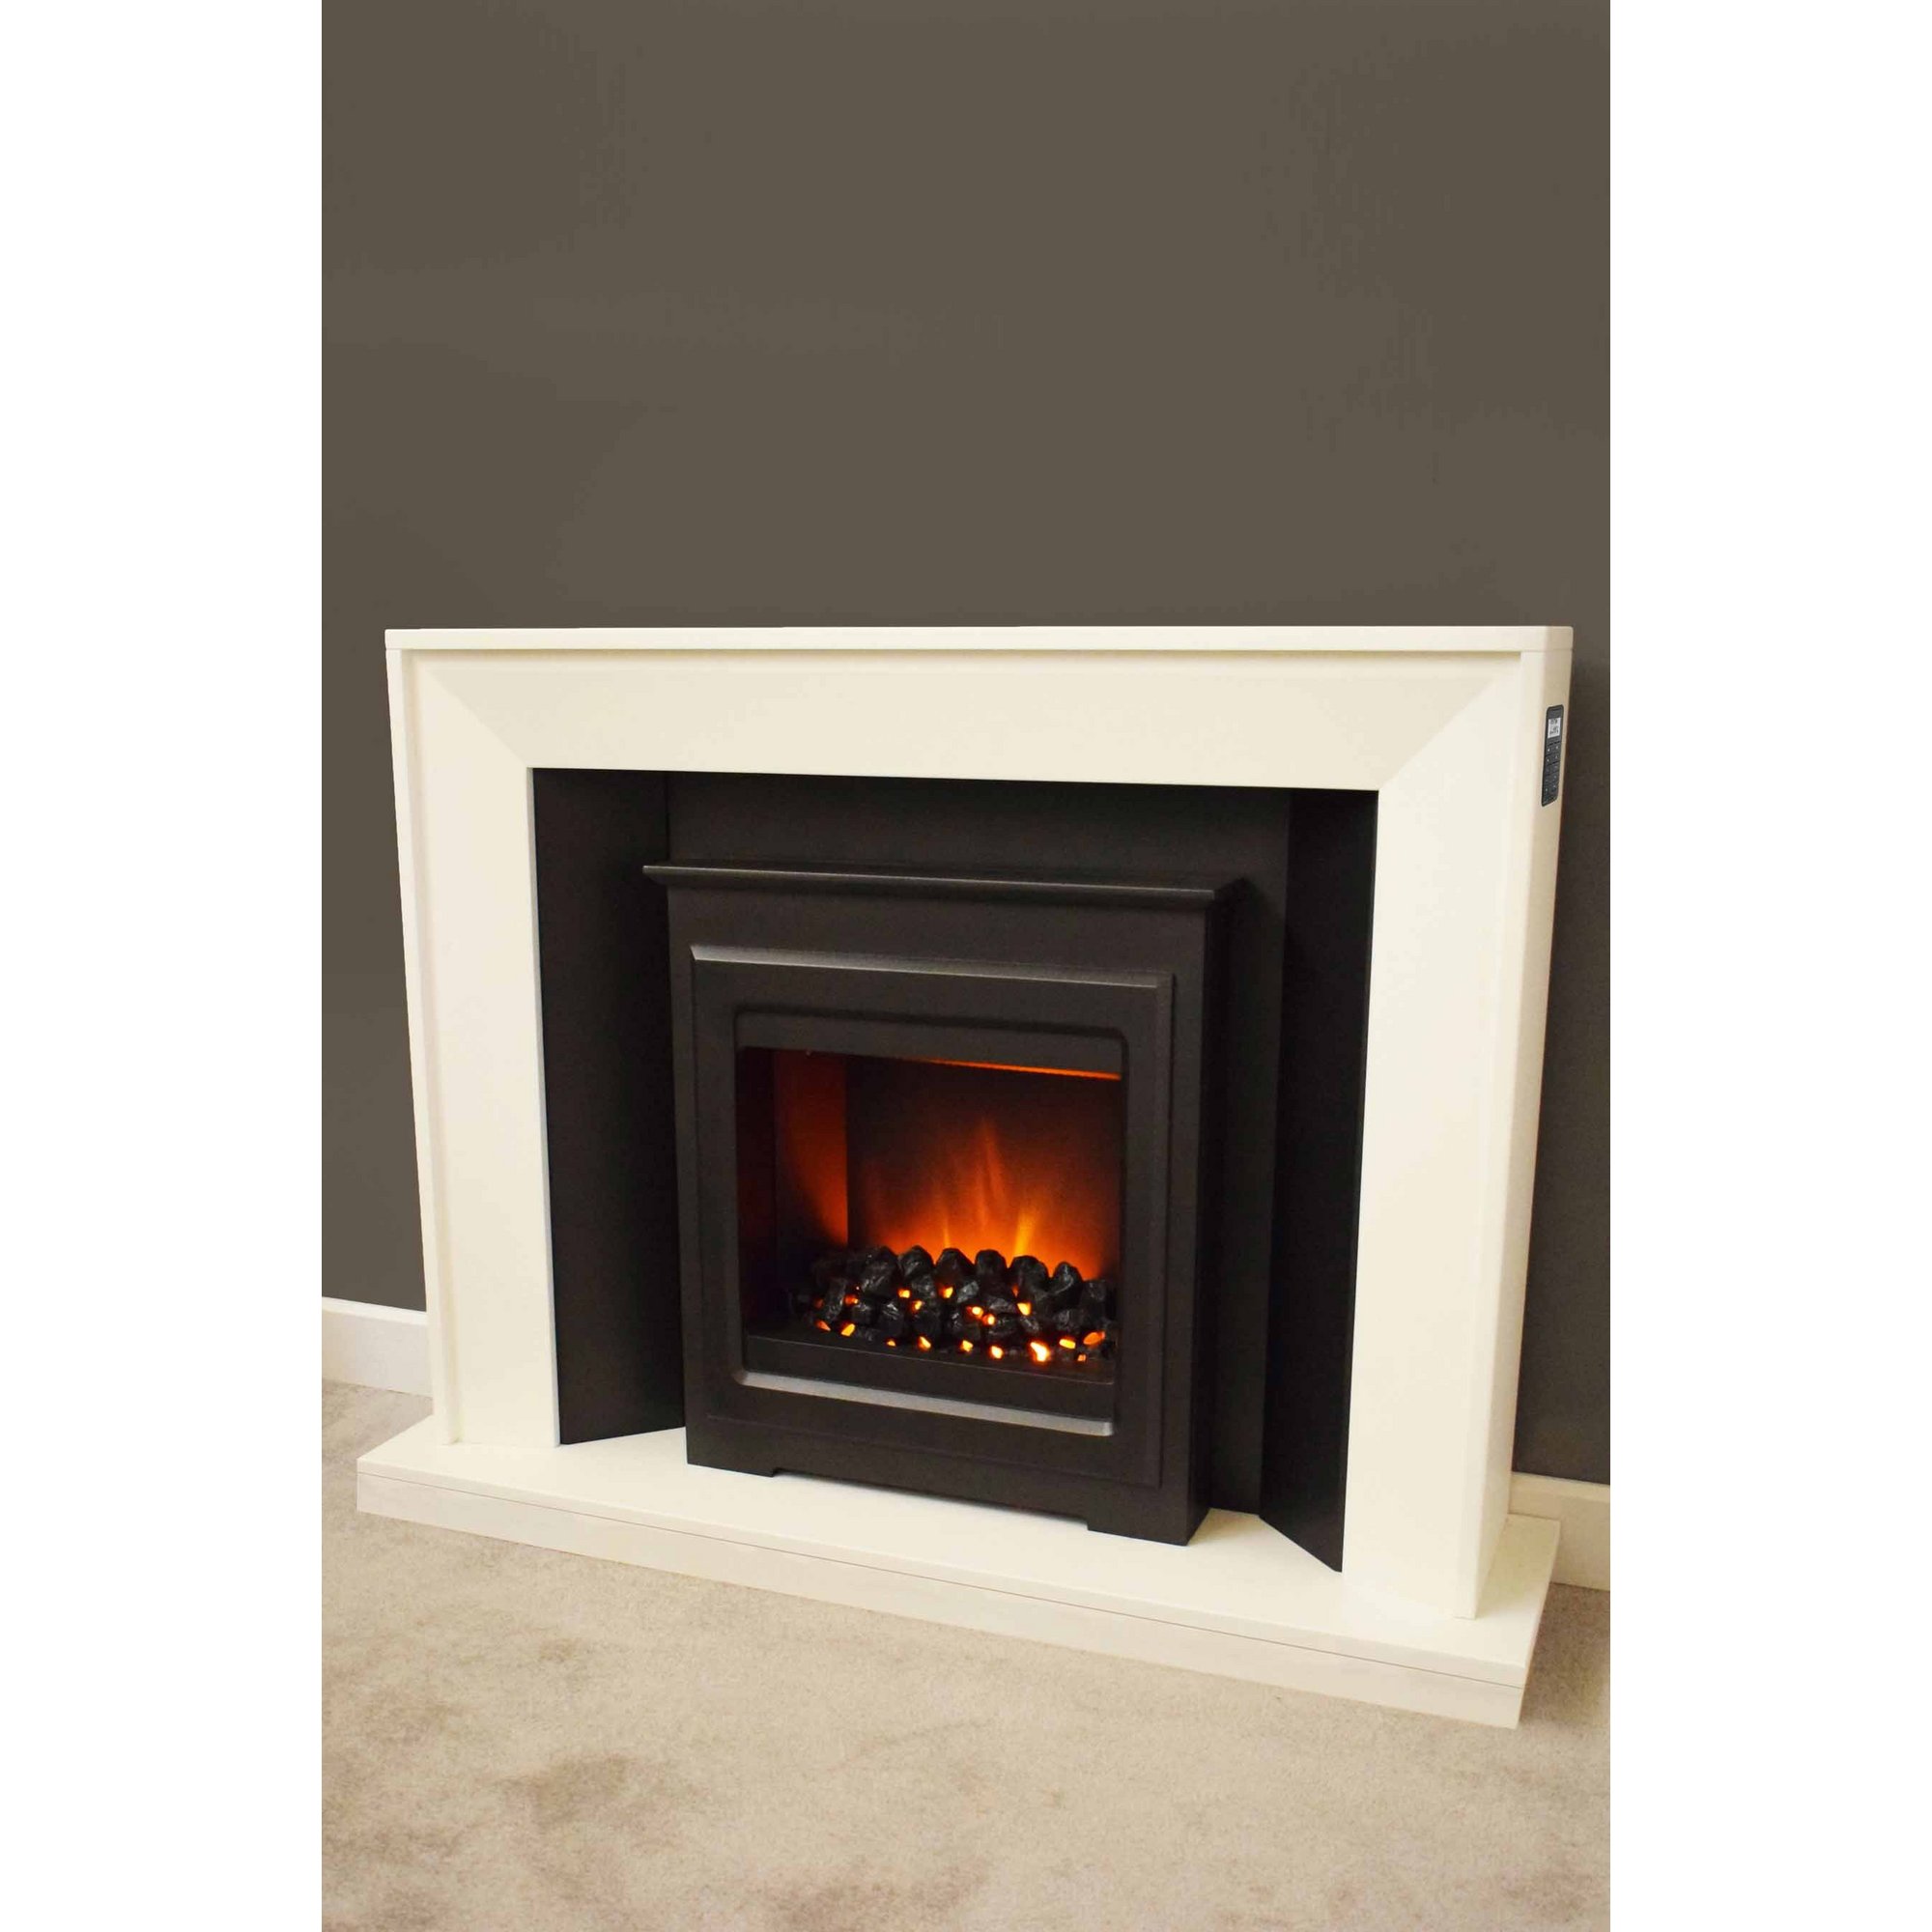 Suncrest Mayford Electric Stove Fire Suite